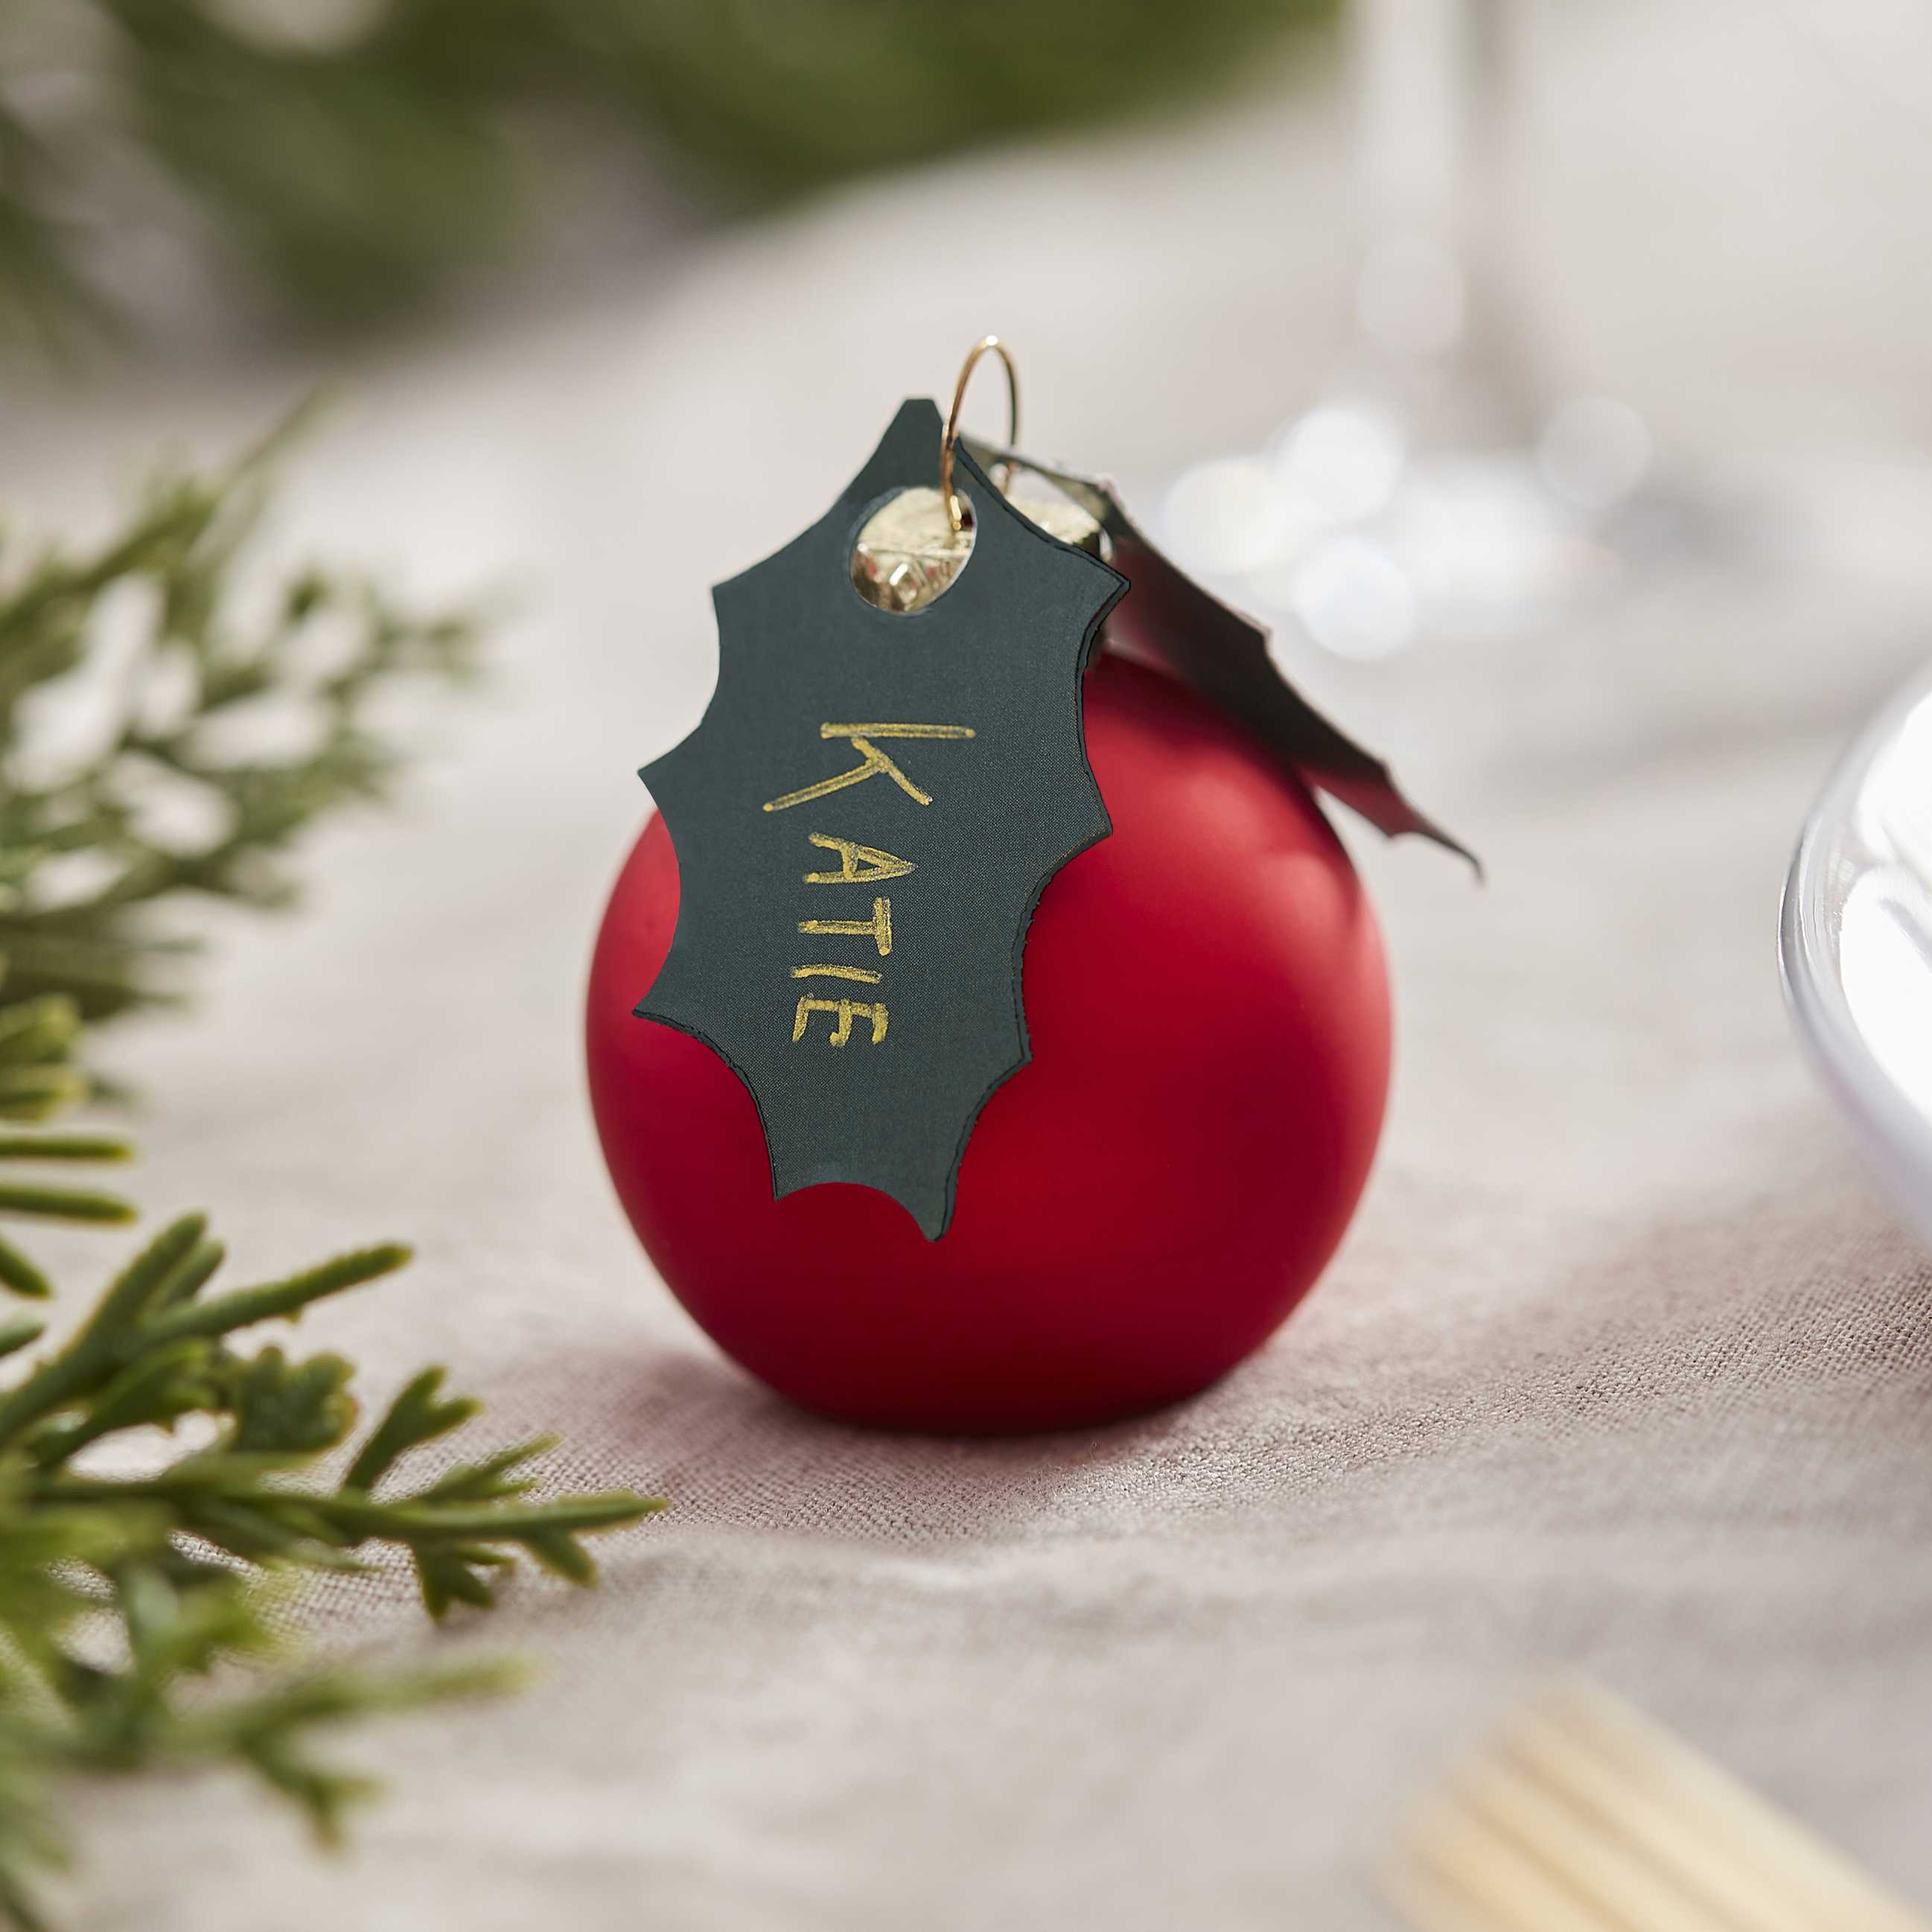 Red Berry Bauble Place Card Holders with Holly Leaf Tags